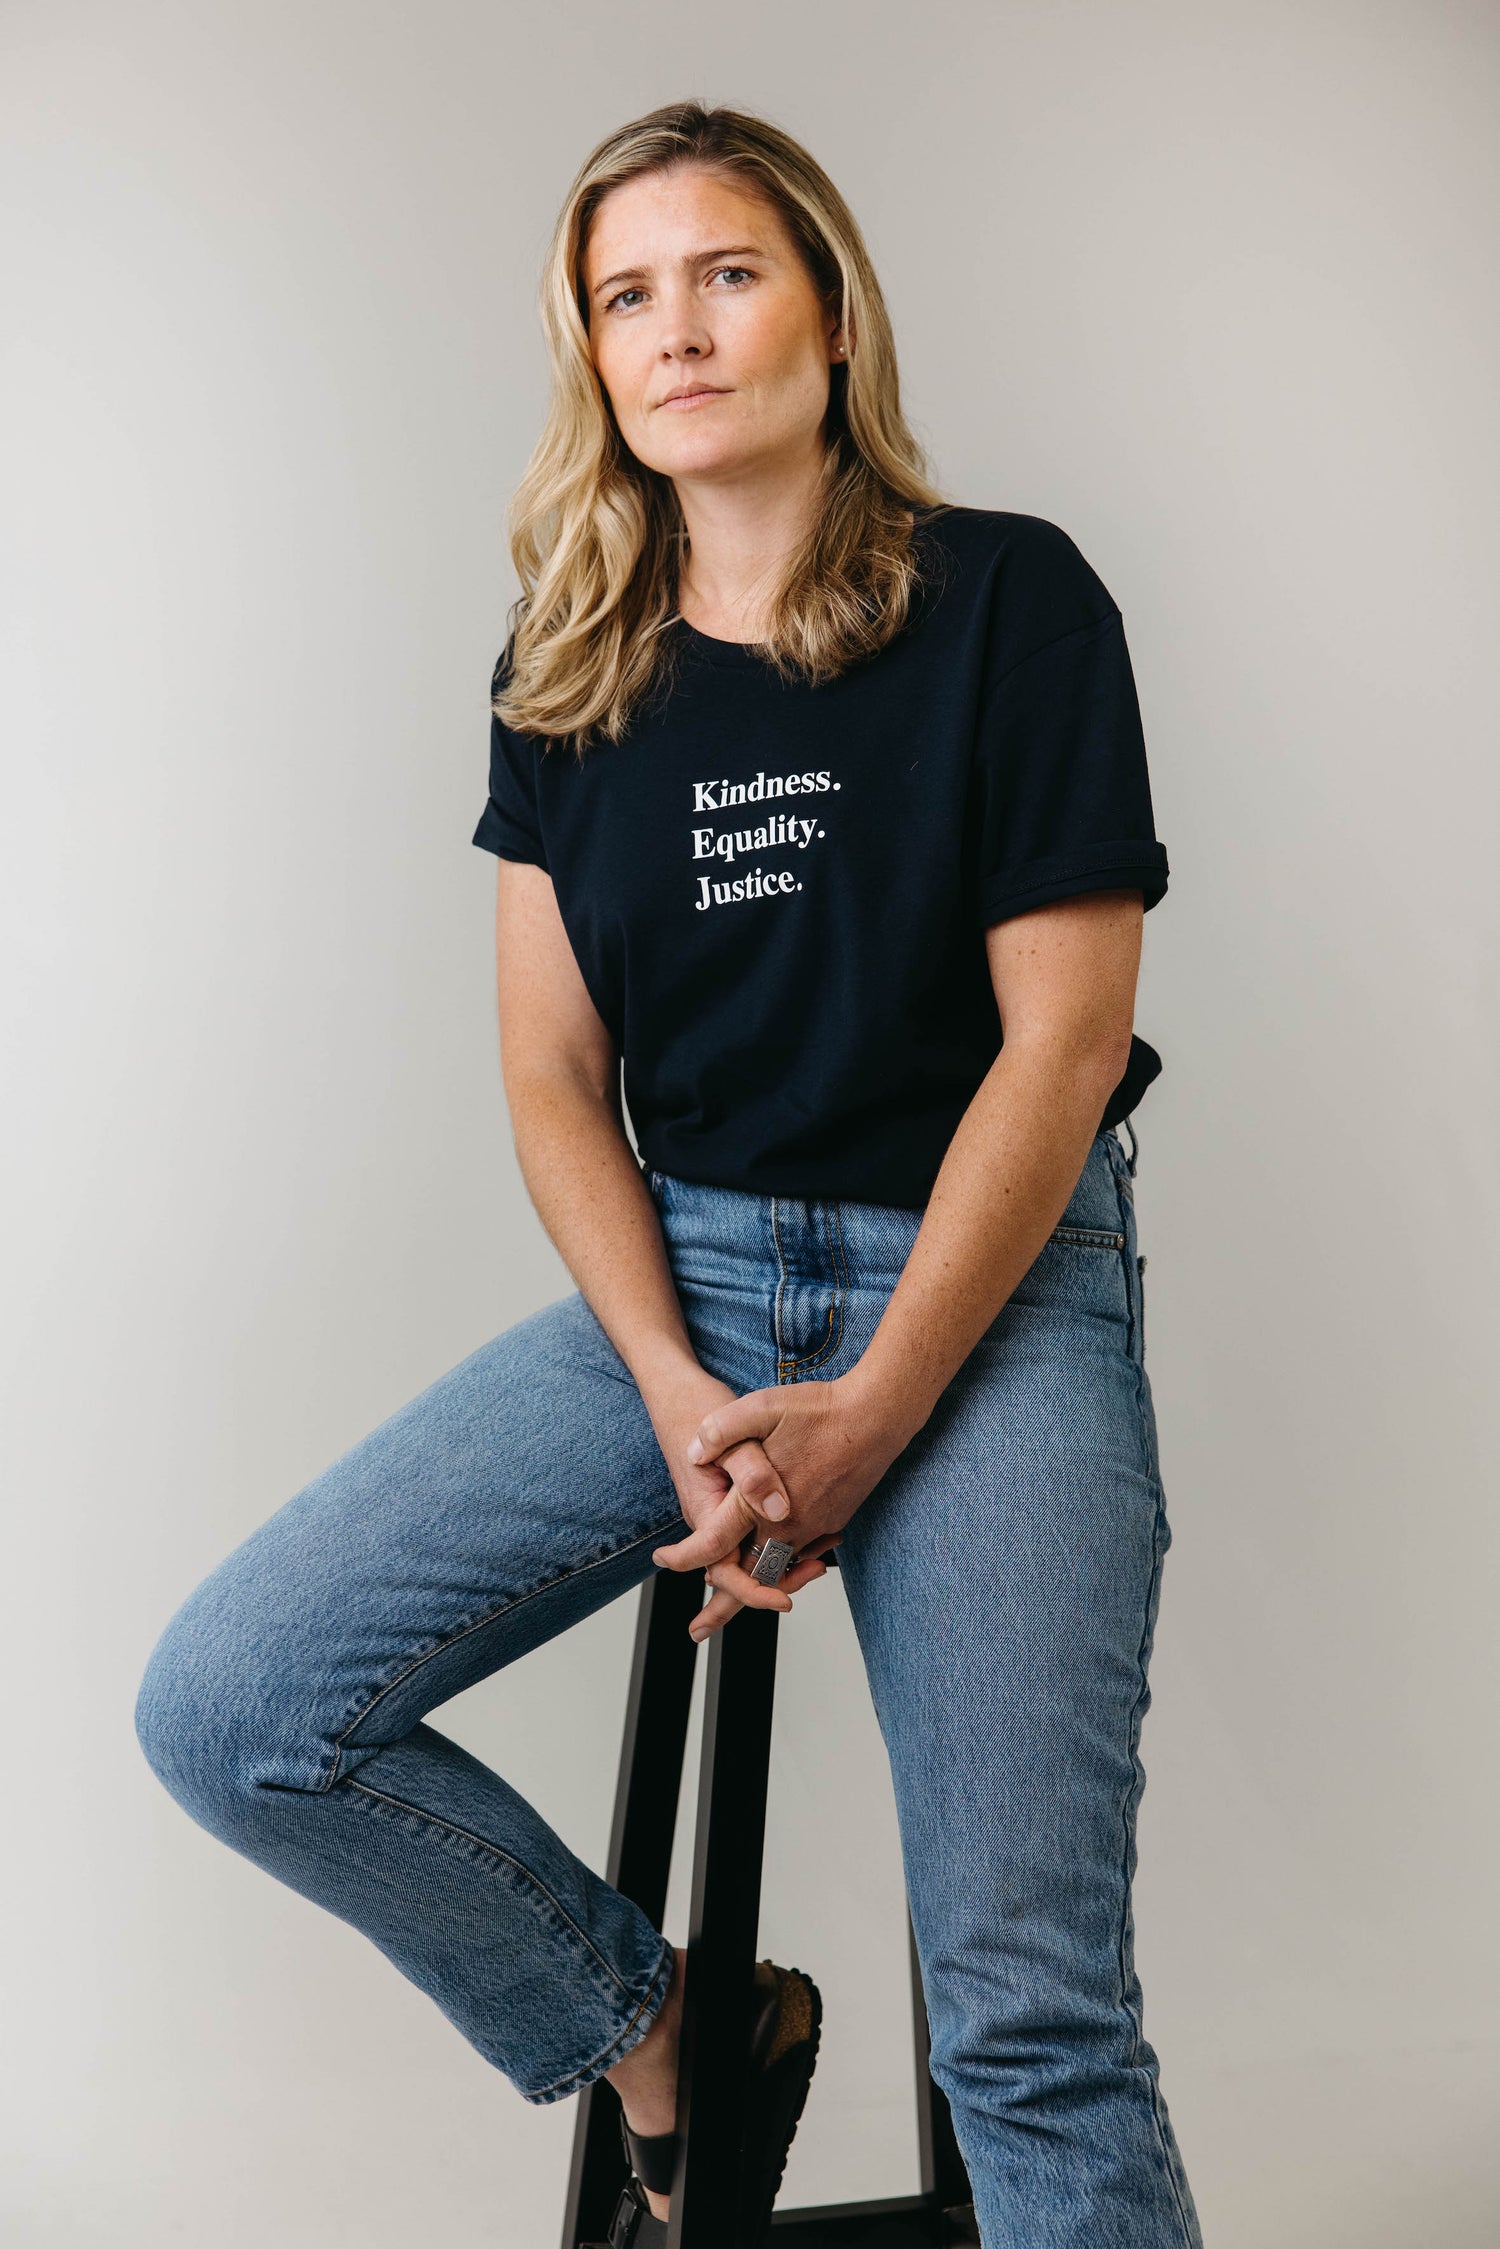 Sophie sitting on a stool smiling wearing an ink blue tshirt with the words 'Kindness Equality Justice.' written in white.